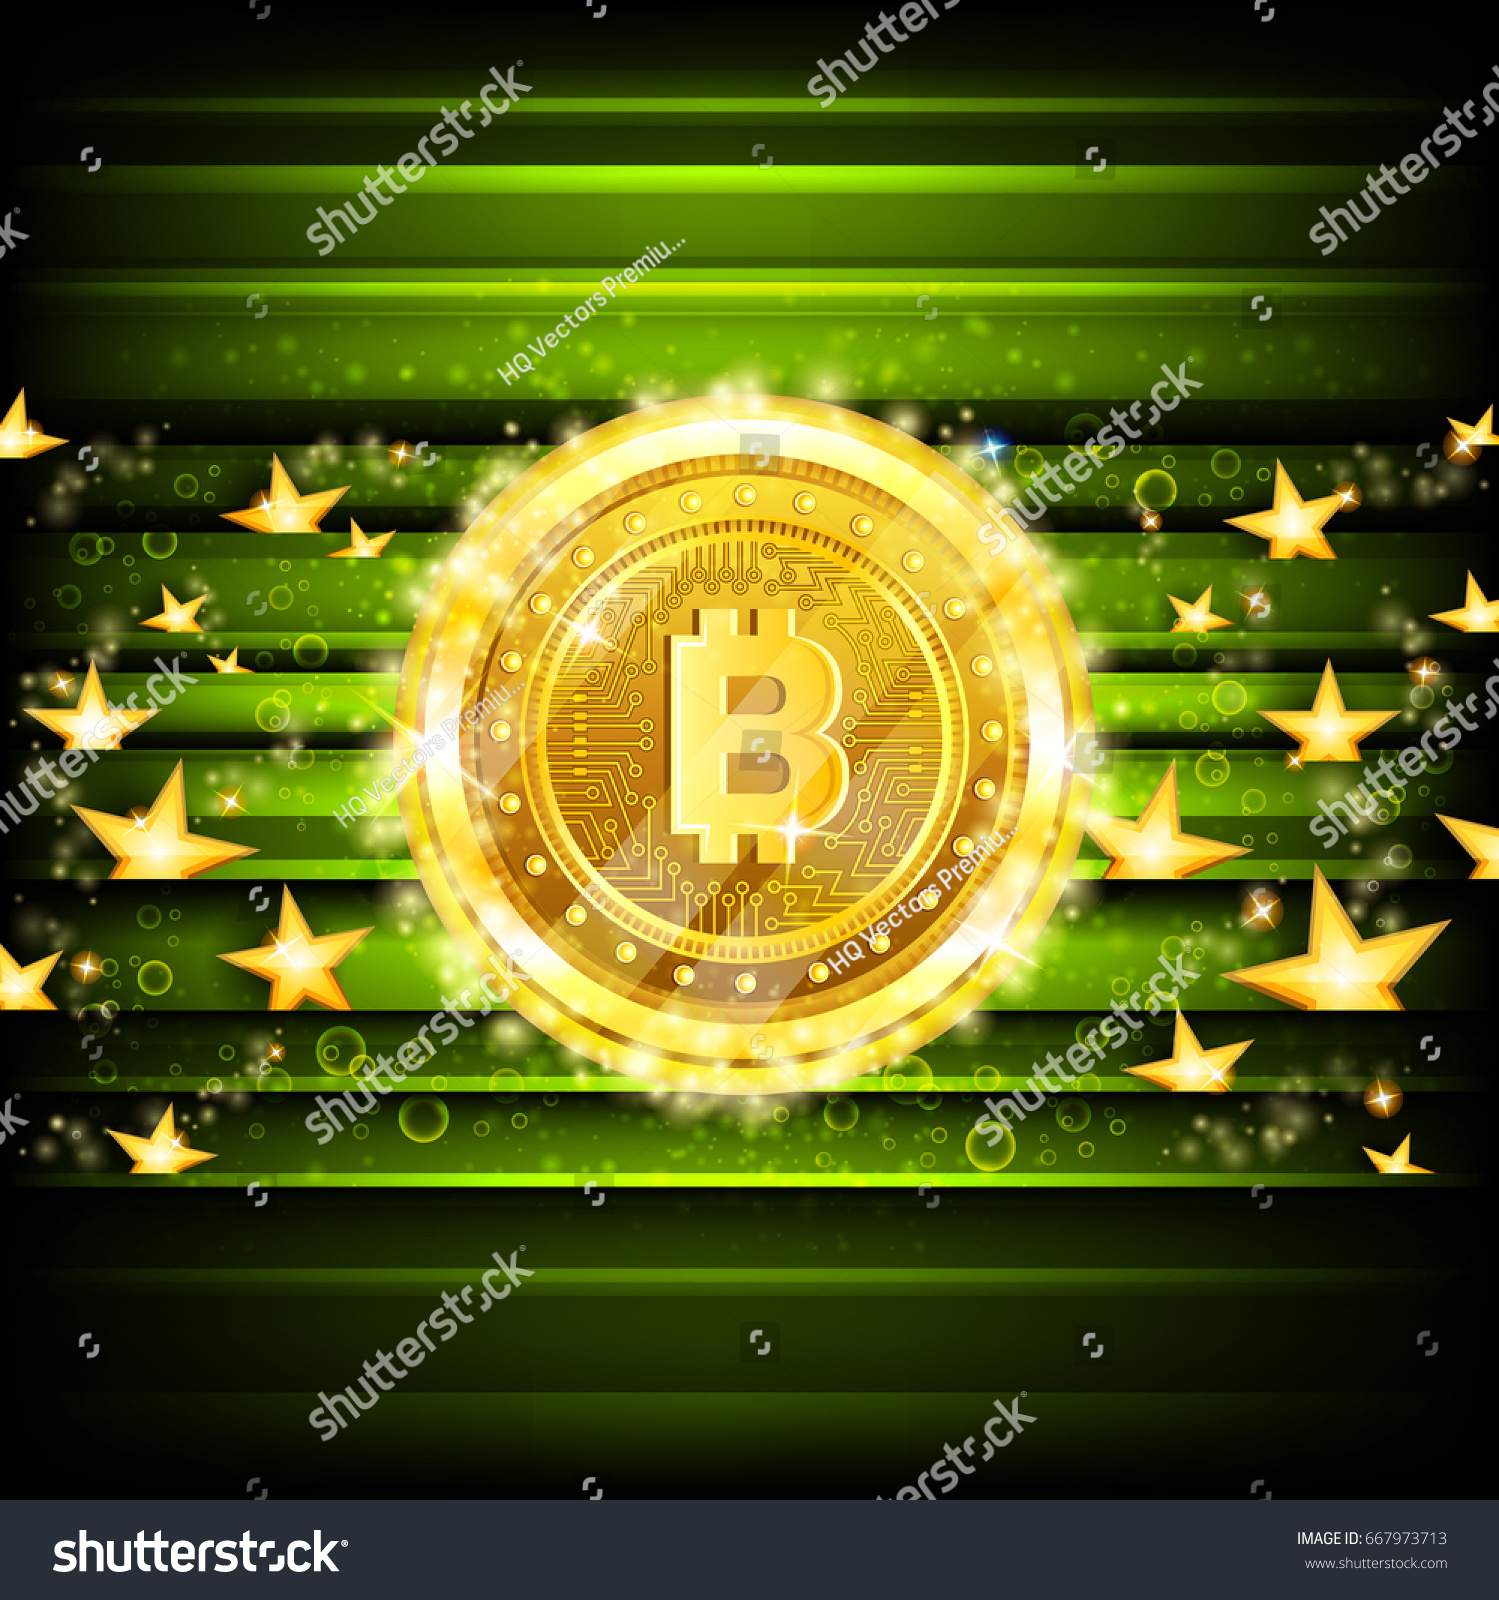 SVG of Golden bit coins and stars on green glossy background svg